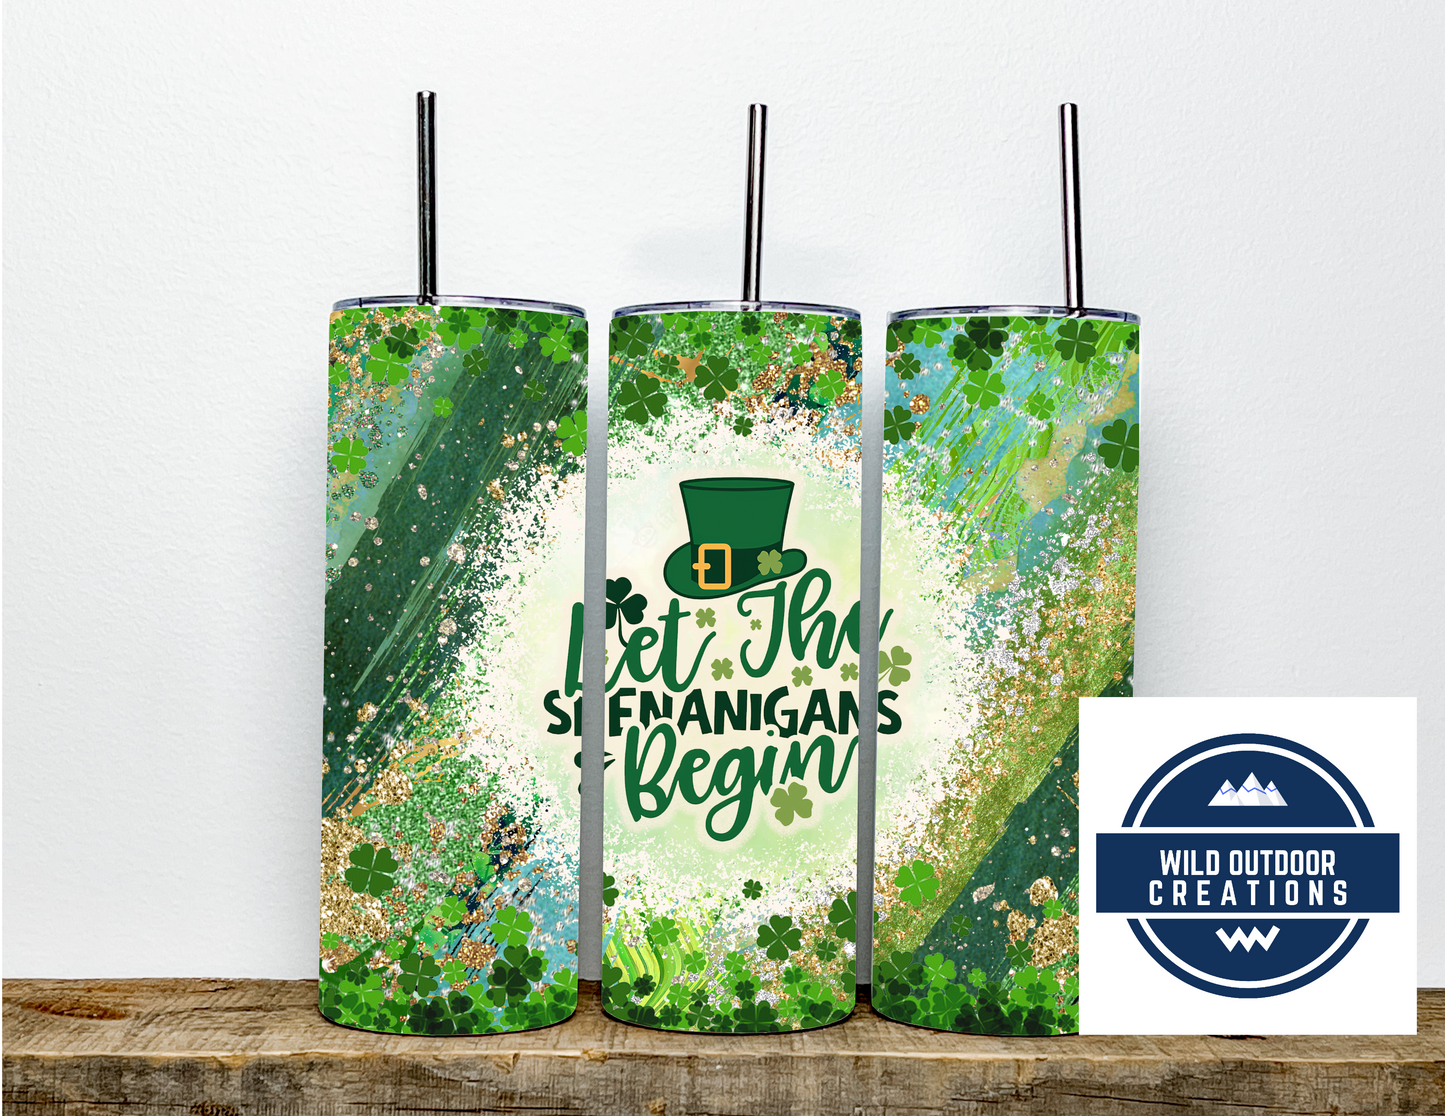 Let the shenanigans Begin 20 oz tumbler, To go cup with lid, Travel Coffee Mug - Wild Outdoor Creations 